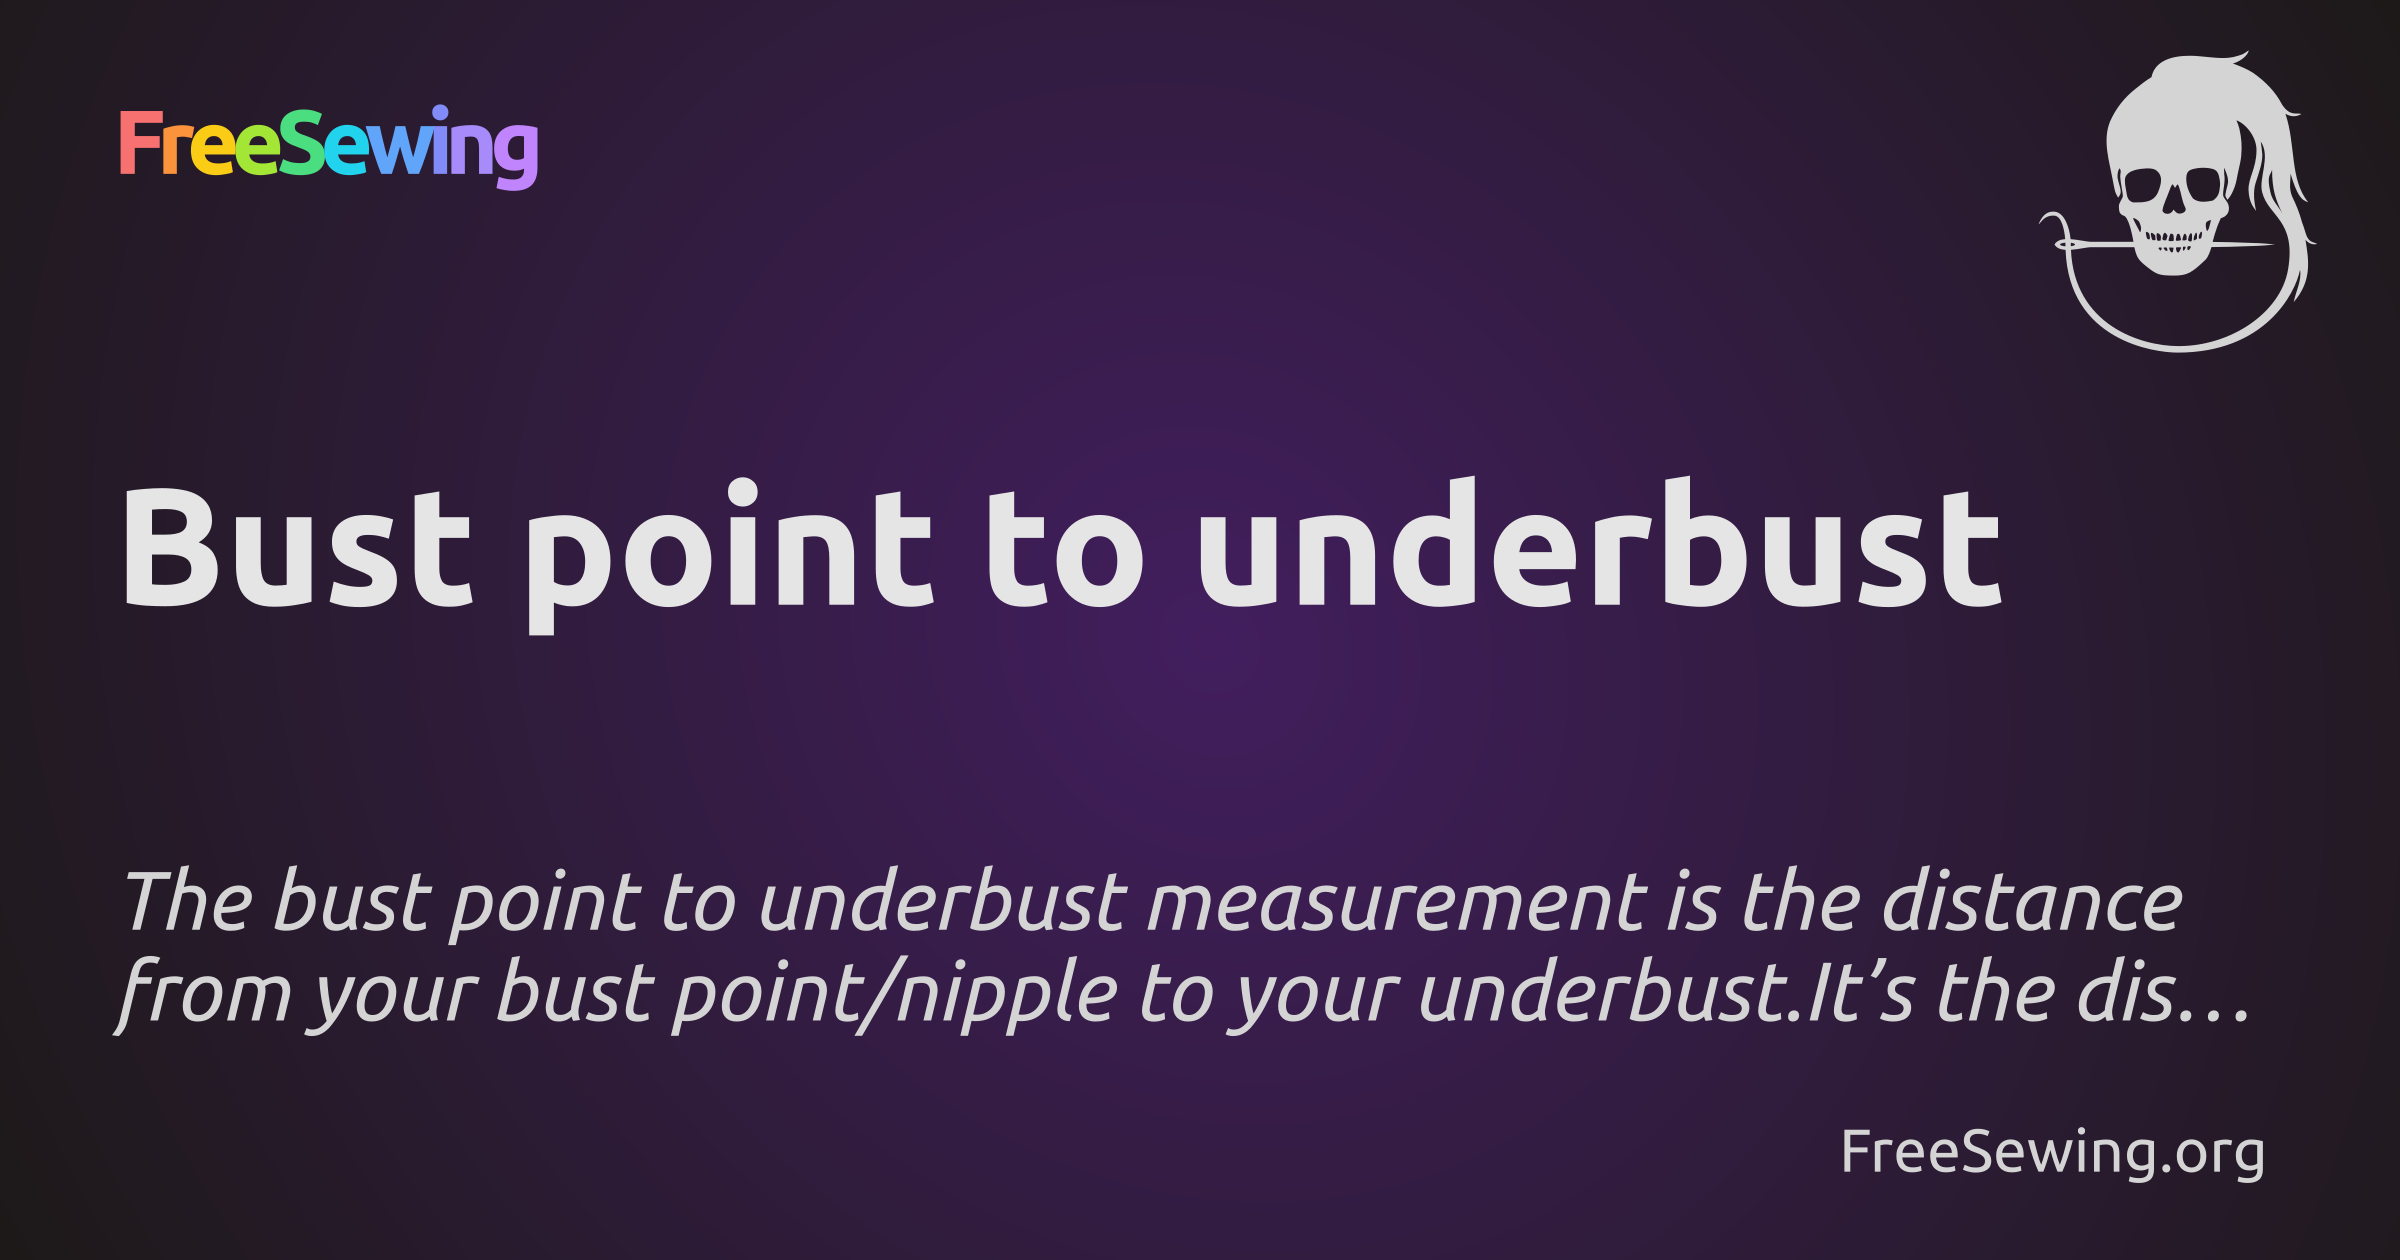 Bust point to underbust